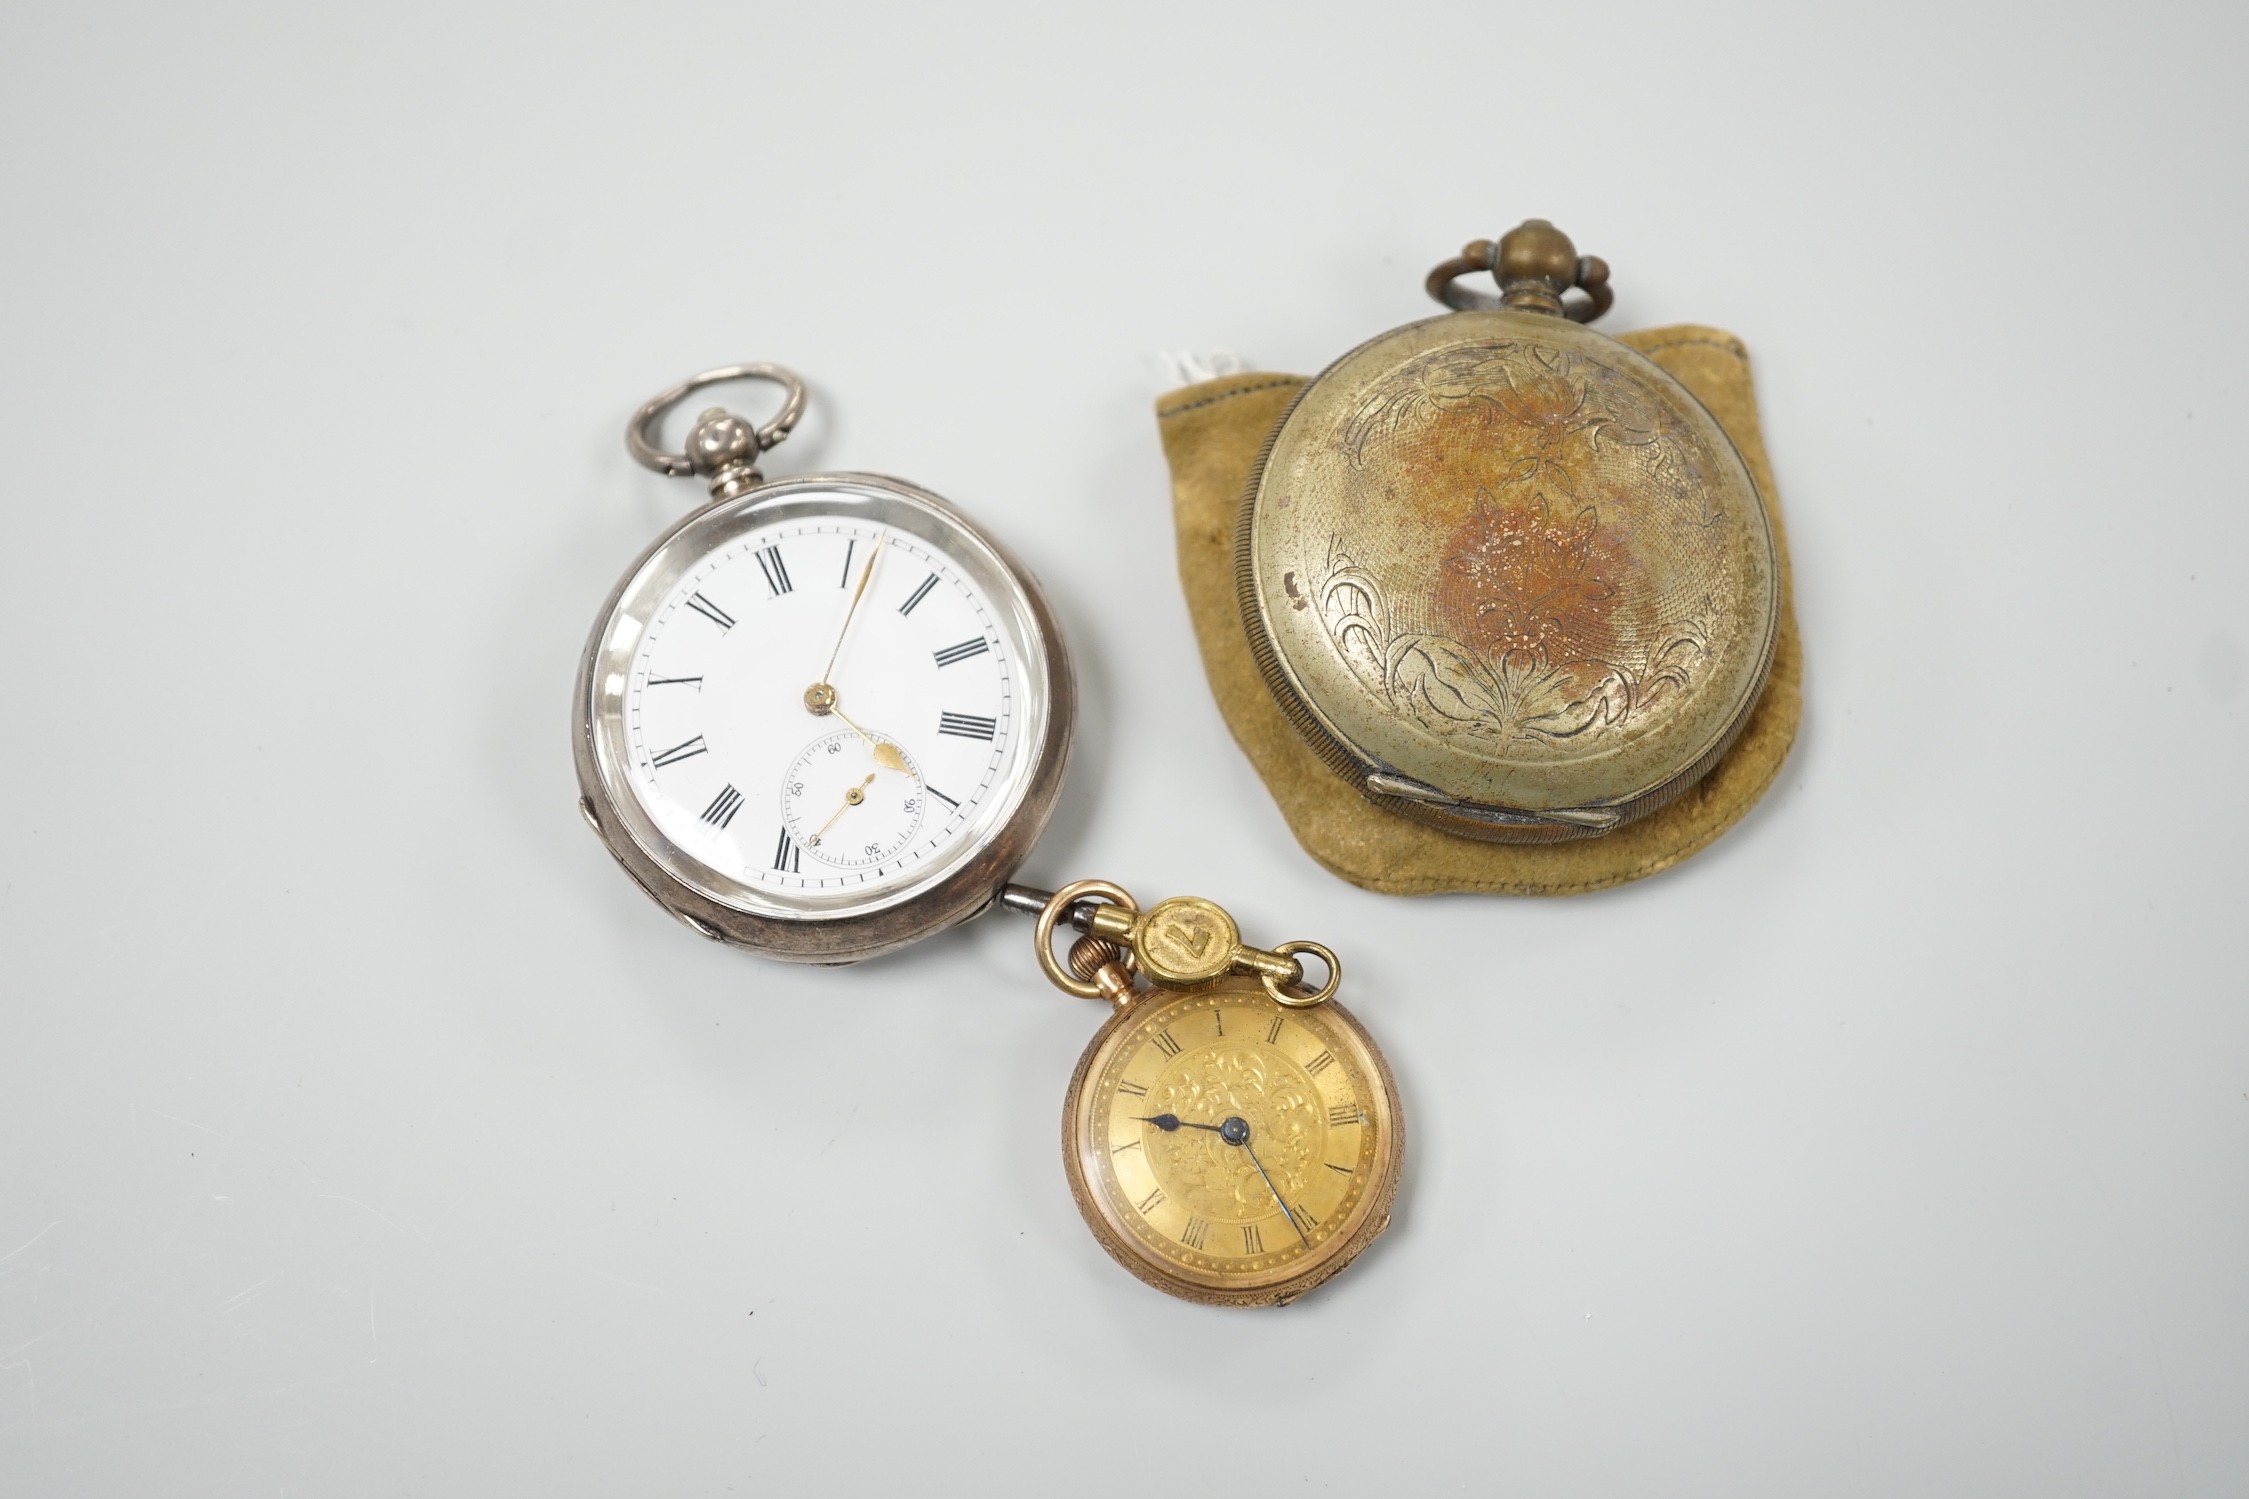 Two 19th century French pocket watch cases and three pocket watches